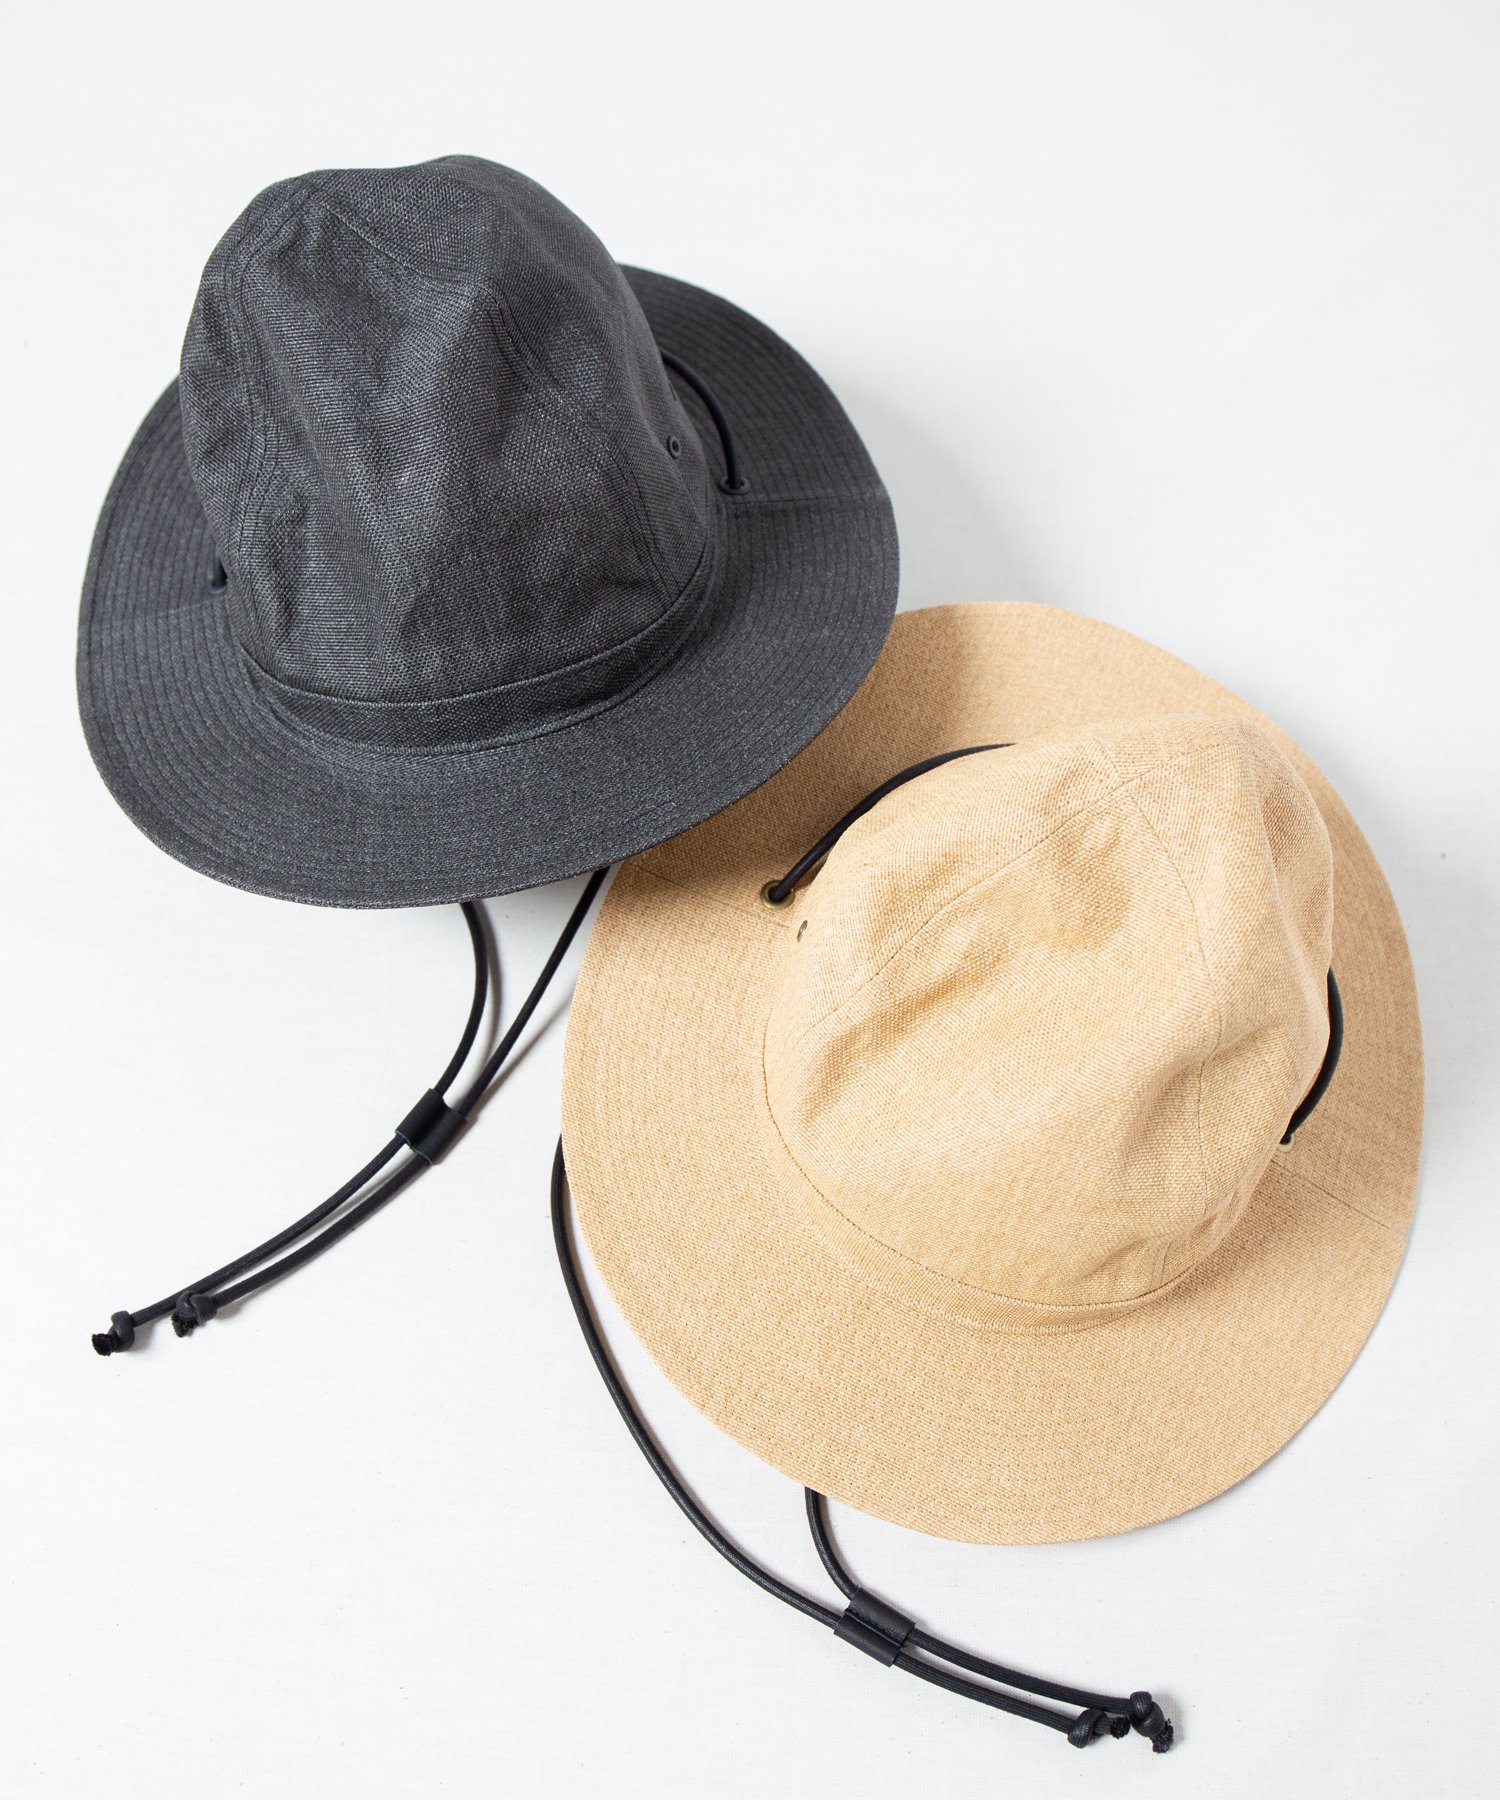 <img class='new_mark_img1' src='https://img.shop-pro.jp/img/new/icons20.gif' style='border:none;display:inline;margin:0px;padding:0px;width:auto;' />【Racal】 Paper Cloth Mountain Hat / ペーパークロスマウンテンハット